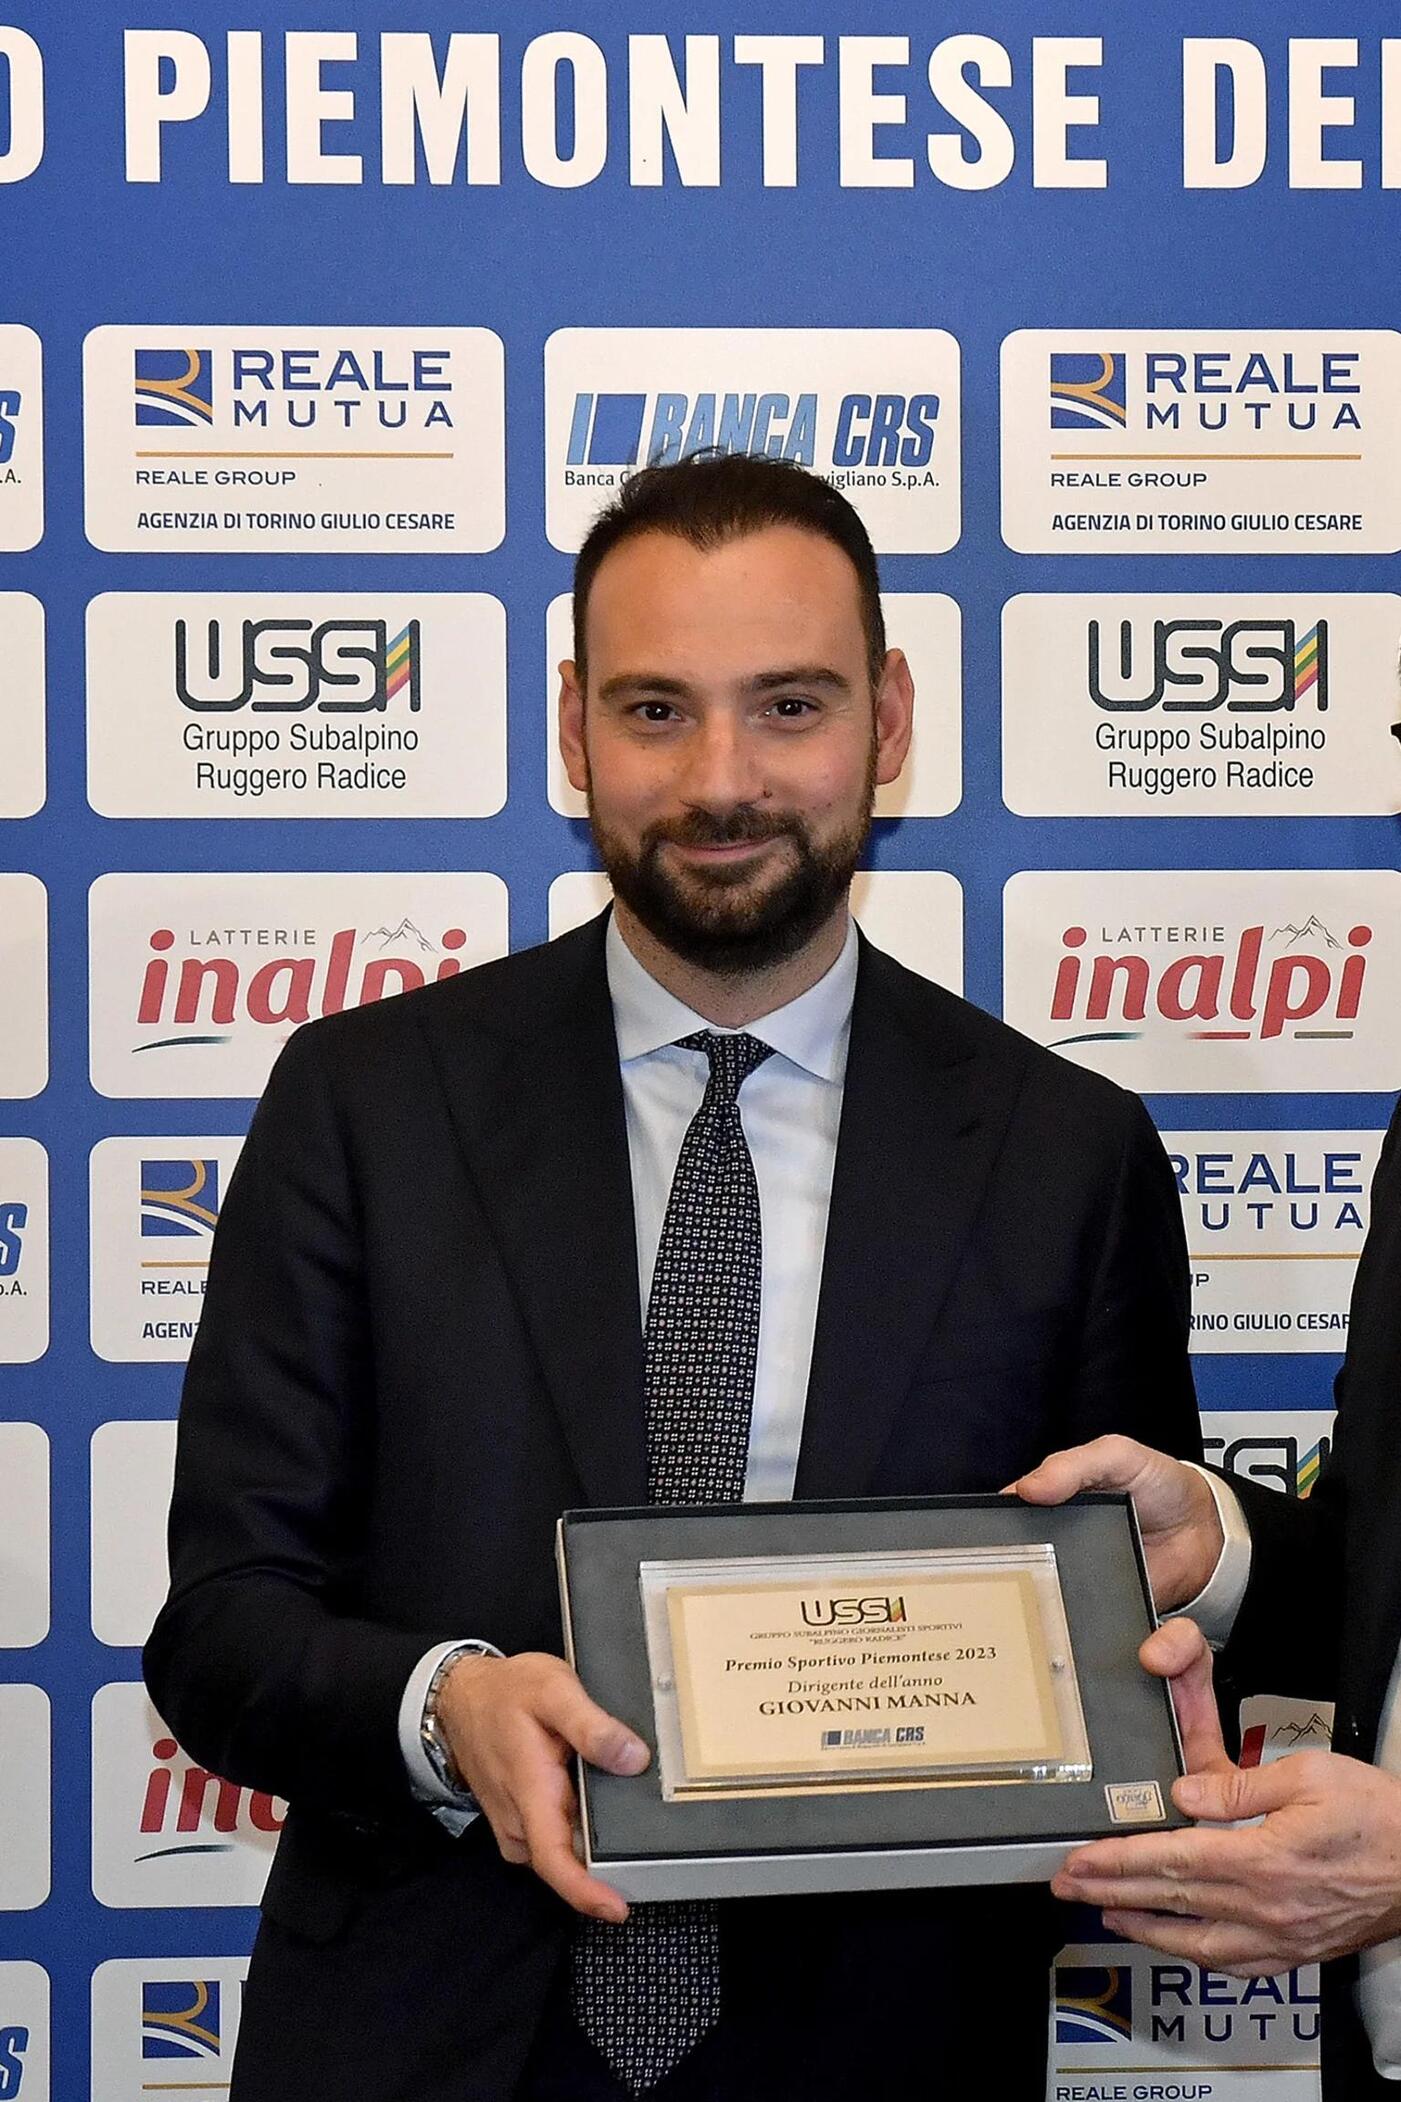 GIOVANNI MANNA RECEIVES MANAGER OF THE YEAR AWARD.jpg